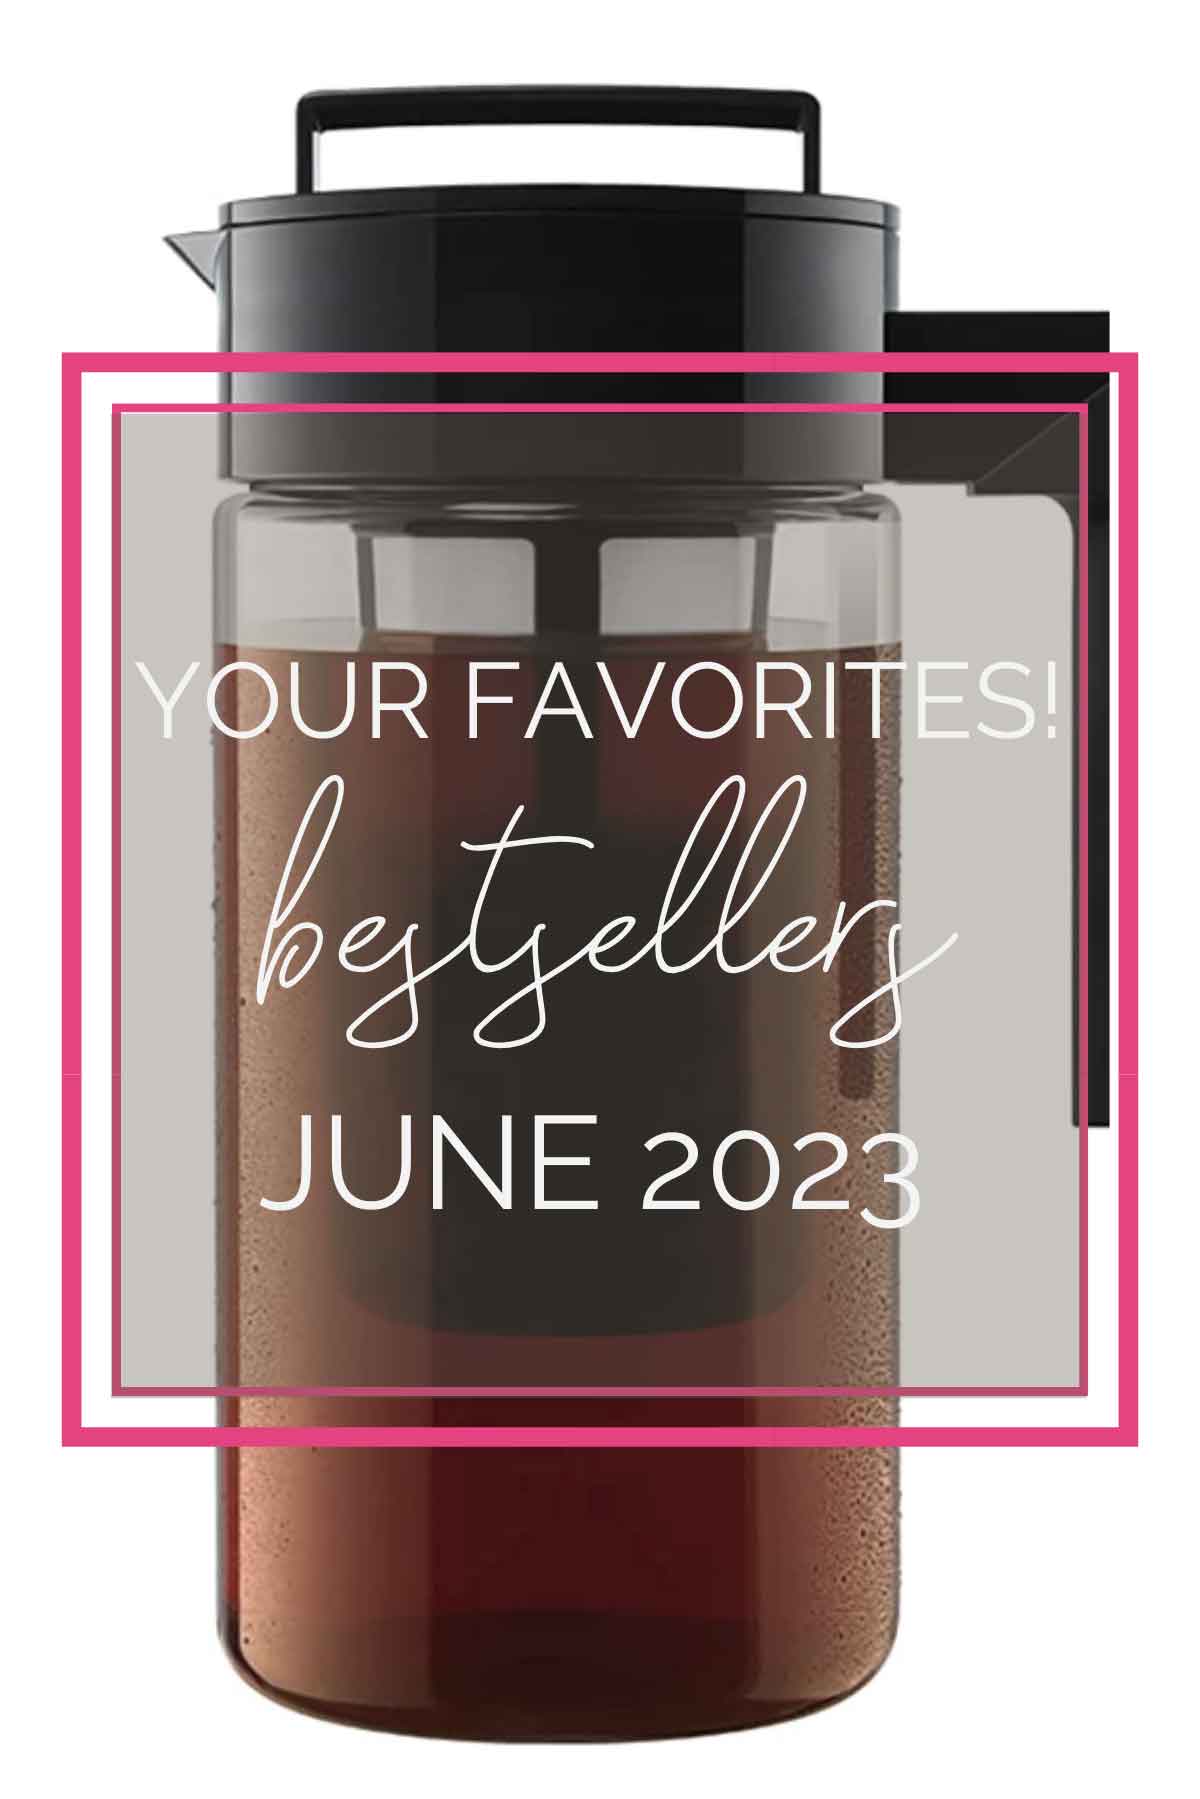 Cold brew coffee pitched with text overlay that reads "Your favorites! Bestsellers June 2023".